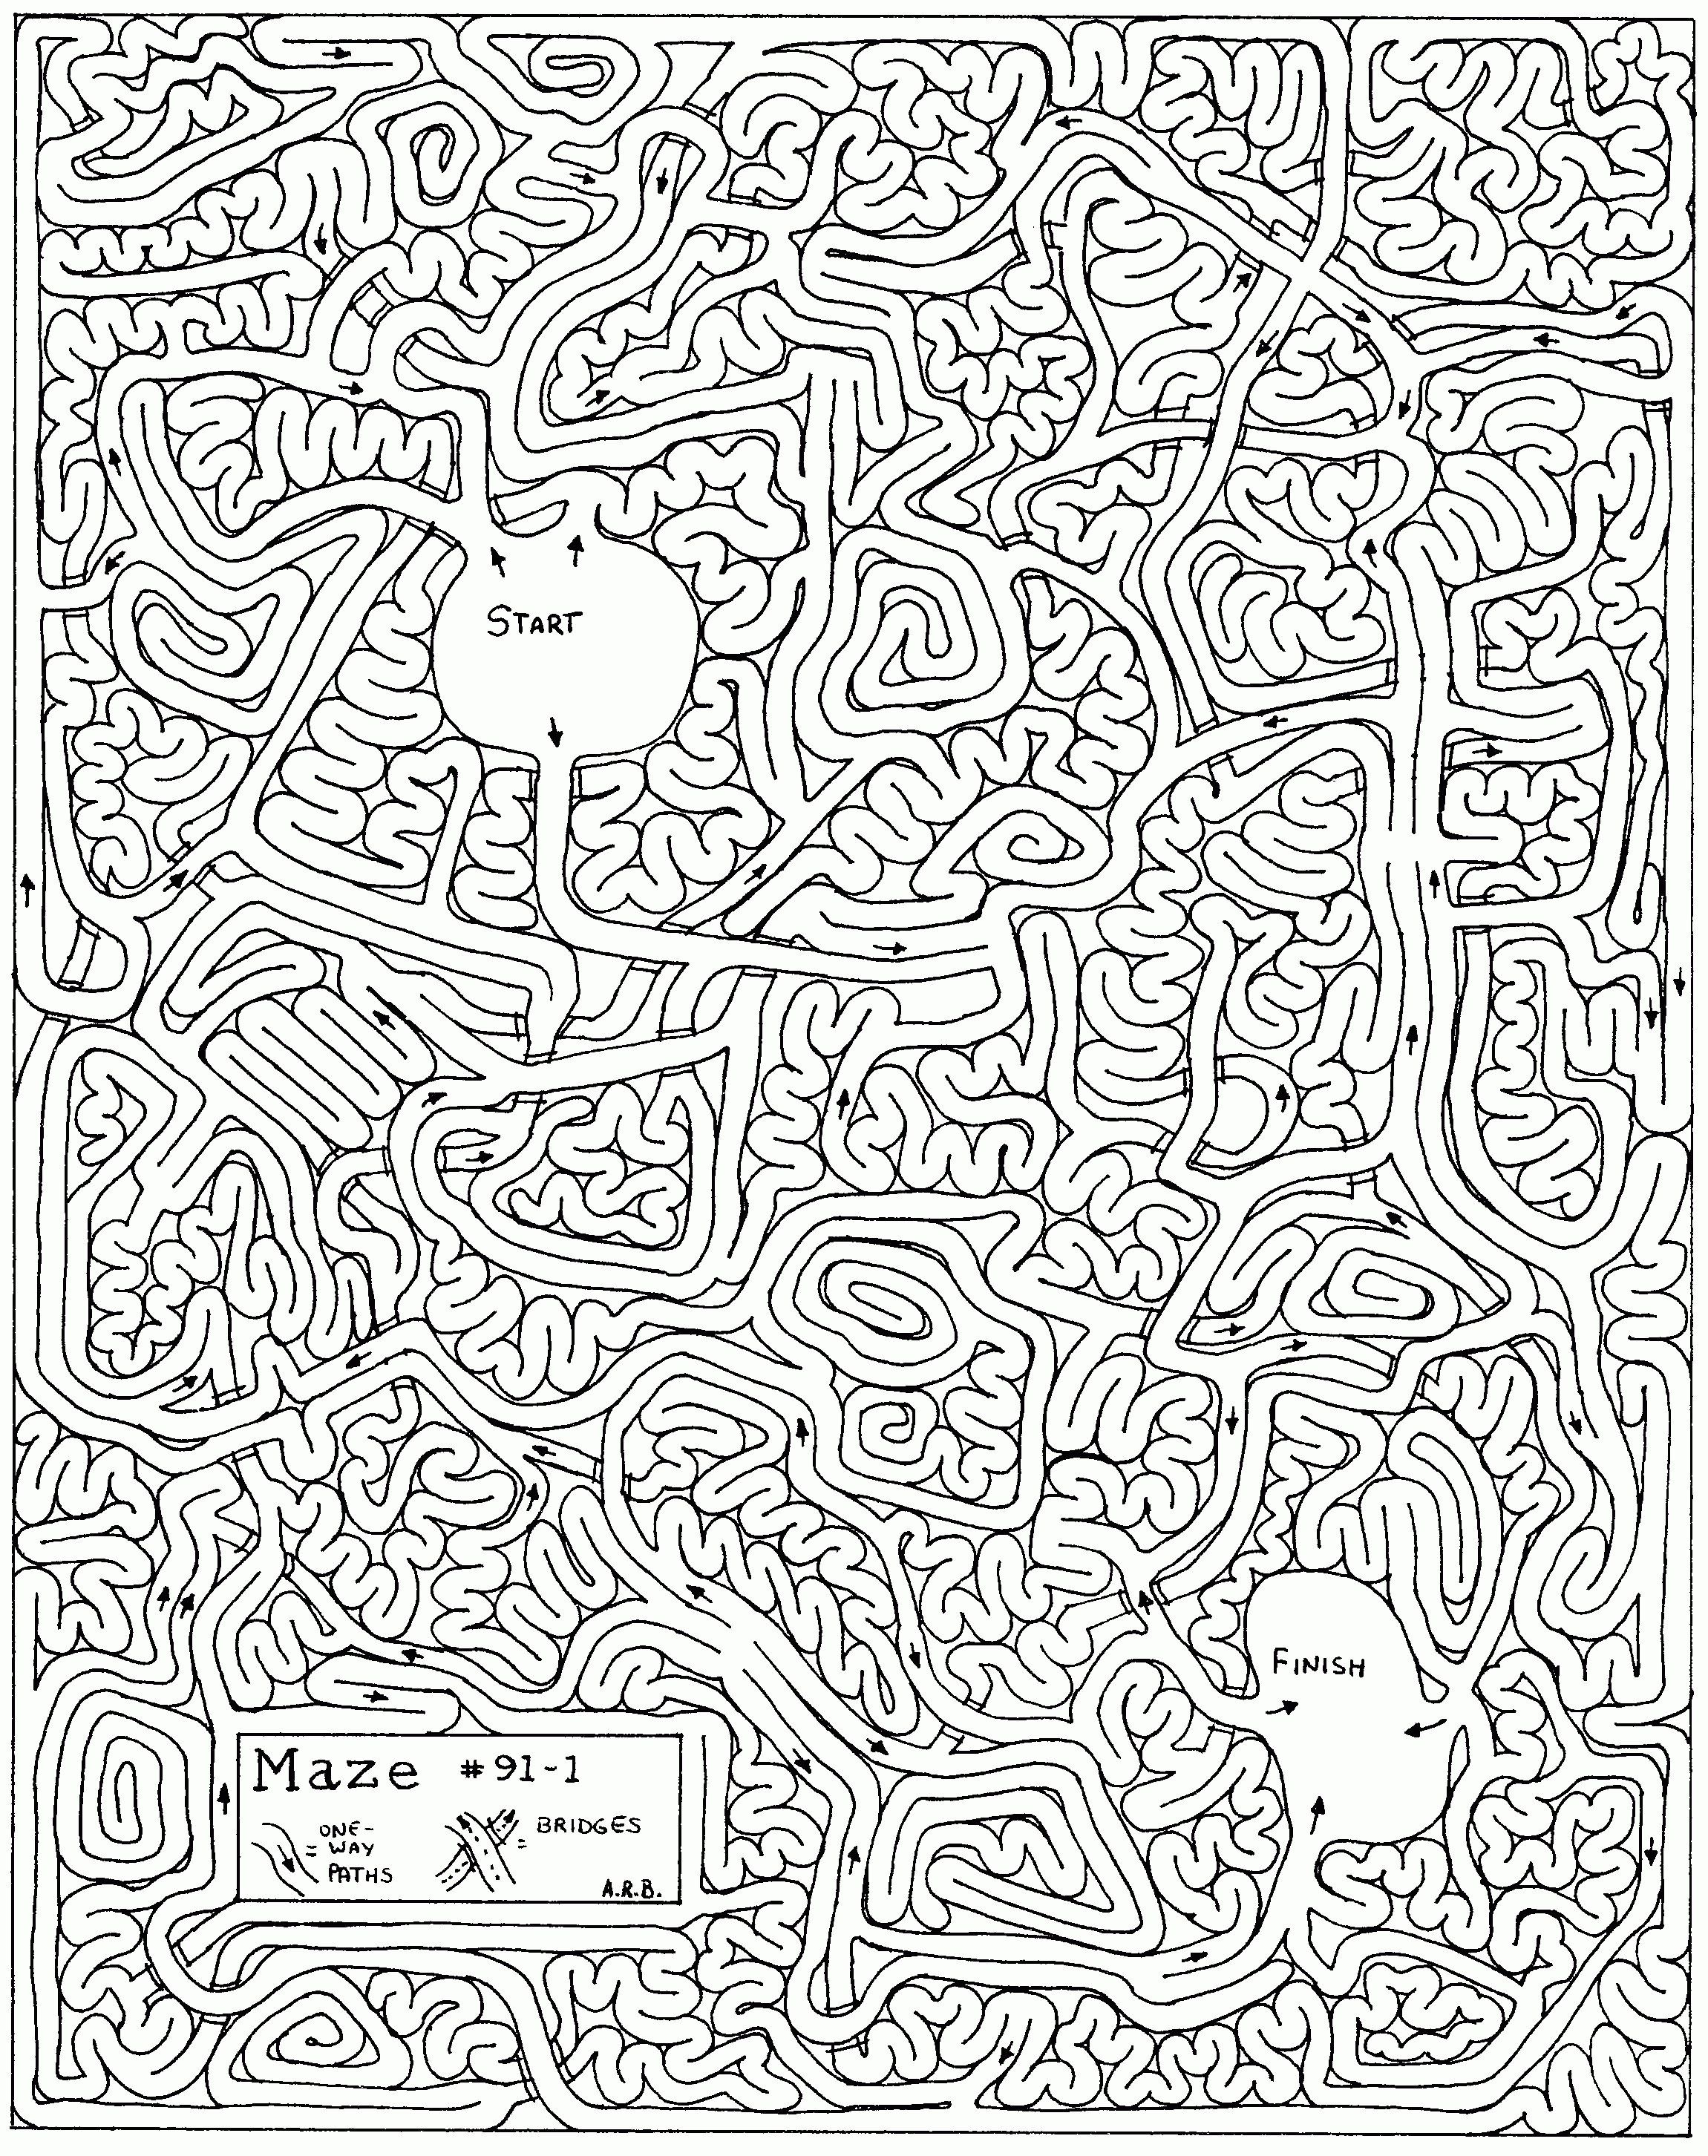 Complicated Coloring Pages For Adults | Andrew Bernhardt&amp;#039;s Mazes - Printable Puzzle Coloring Pages